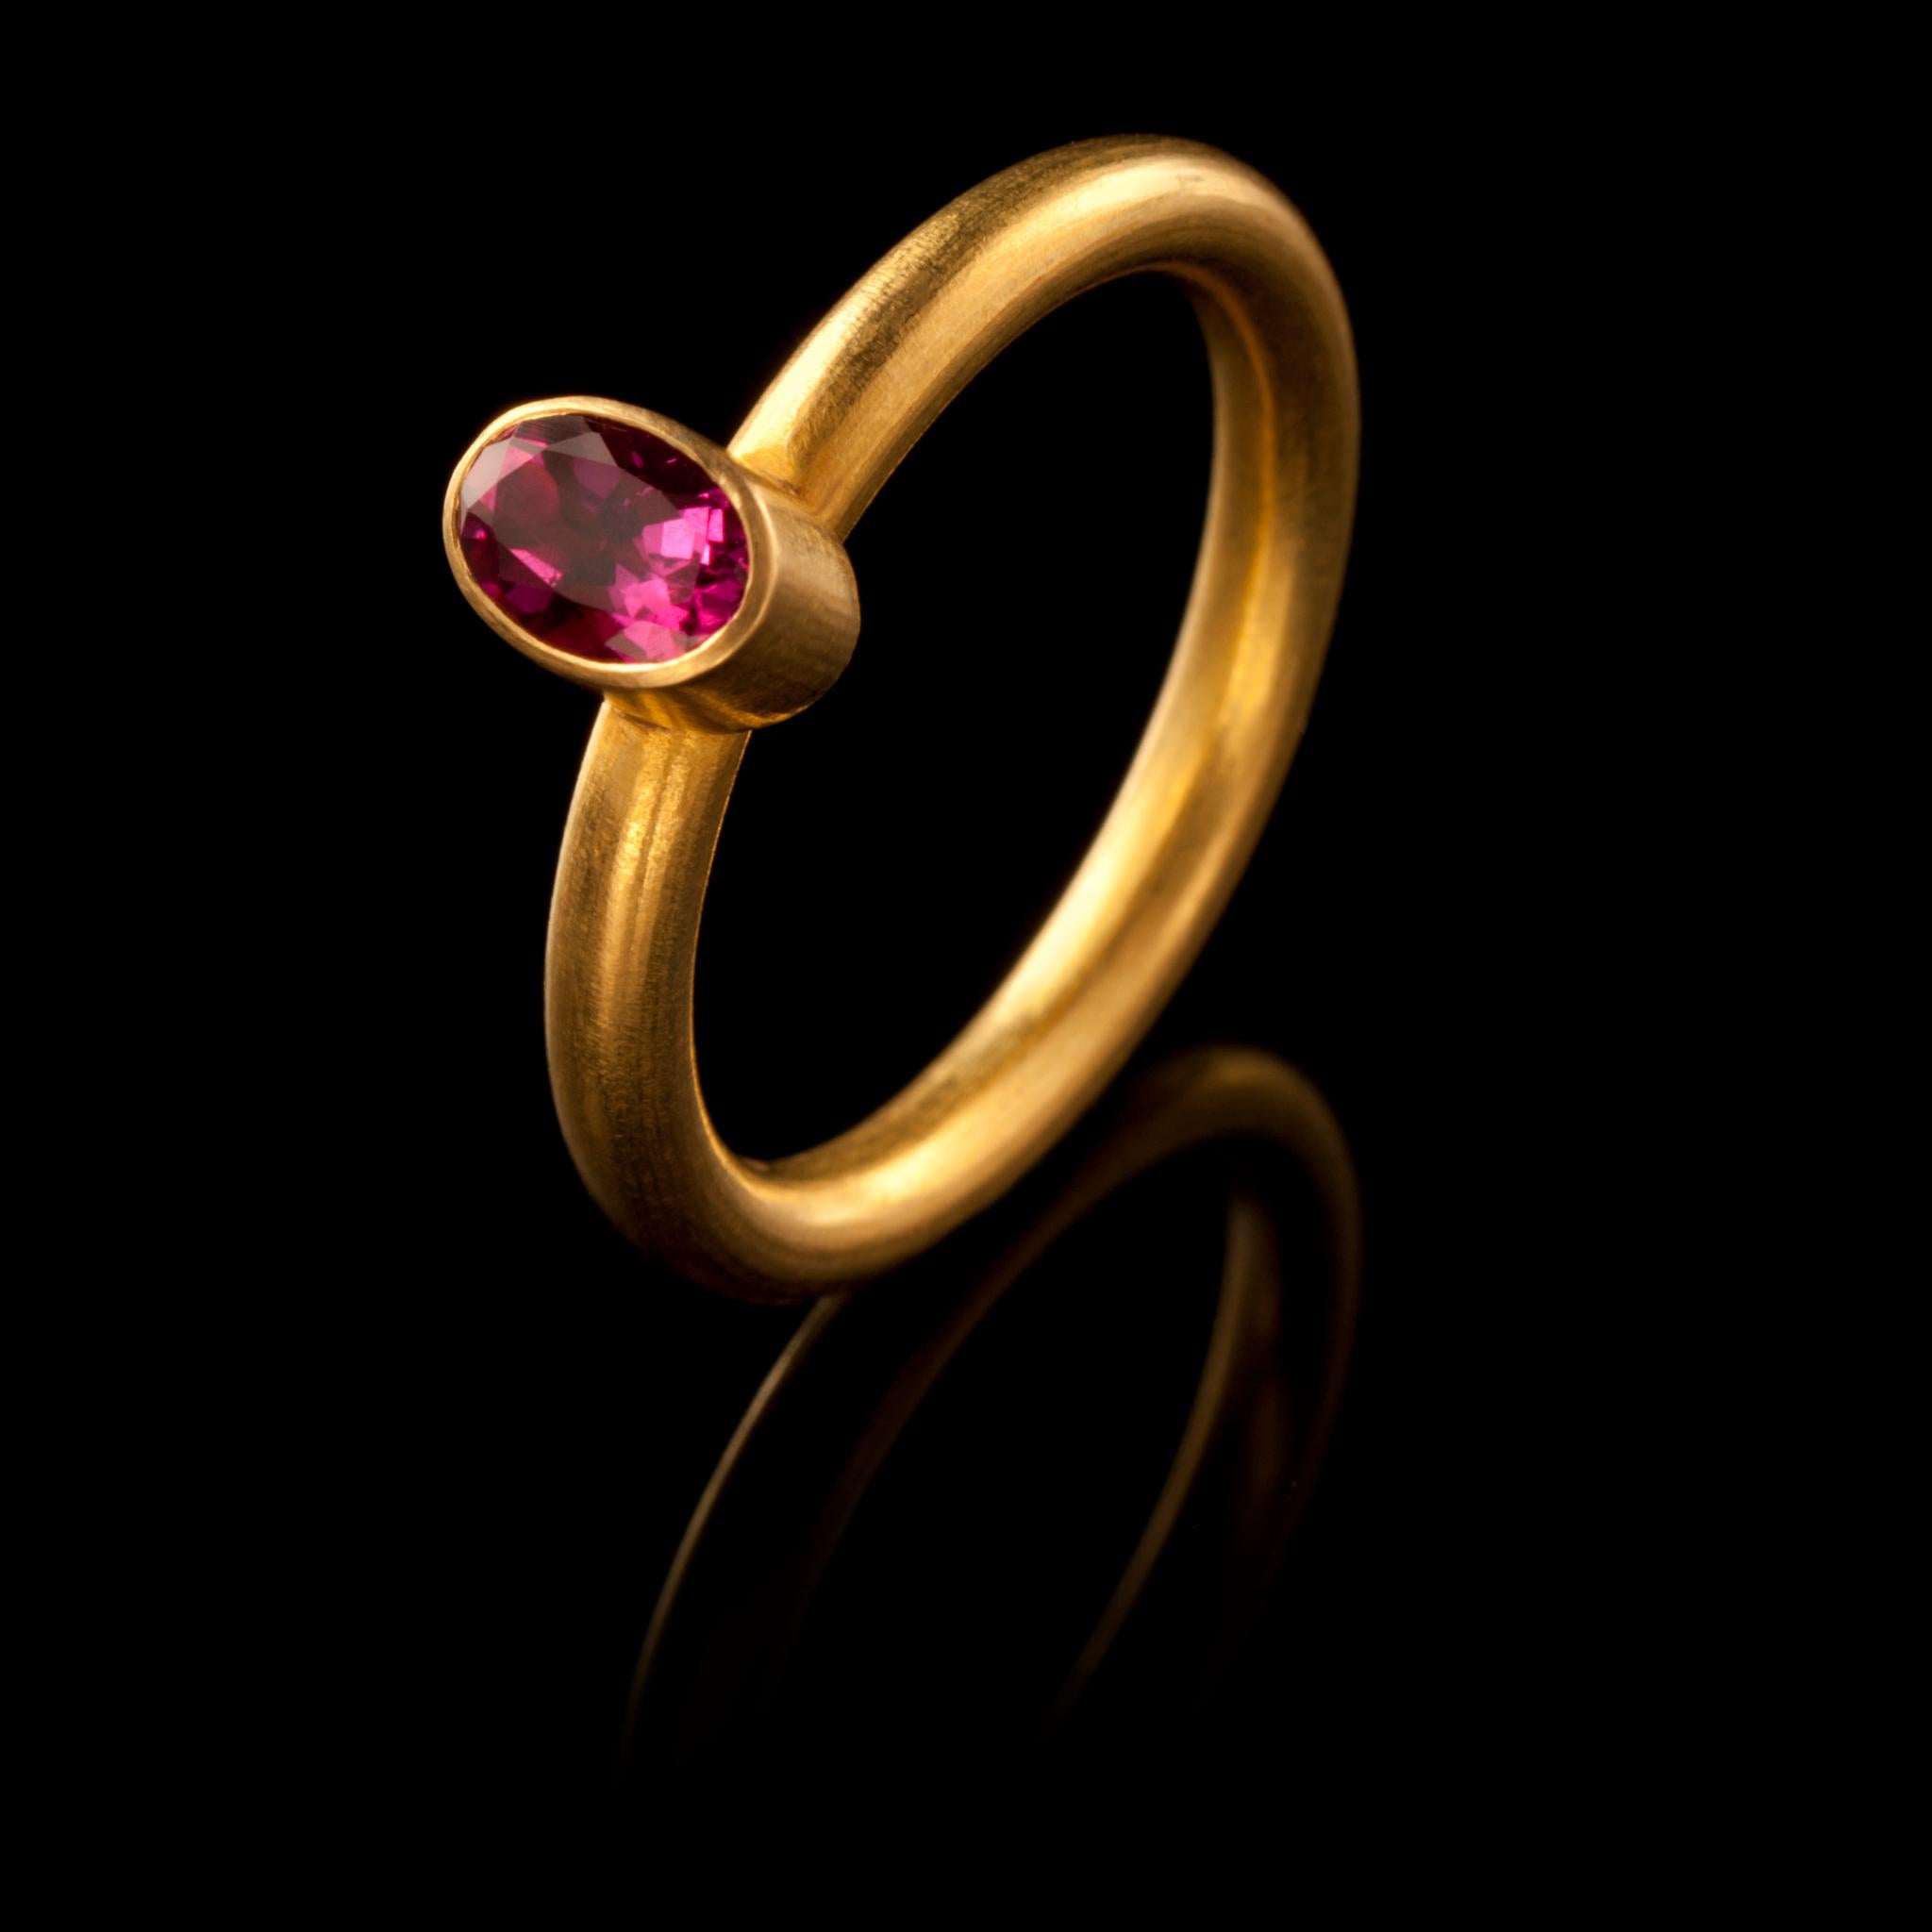 A chic, hand crafted 18 karat matte gold stacking ring with an oval, faceted hot pink tourmaline. Size: UK O/P, US 7.6, Europe: 56.5. The ring can be resized. Wear it on its own or with other rings from the collection as shown on our model.